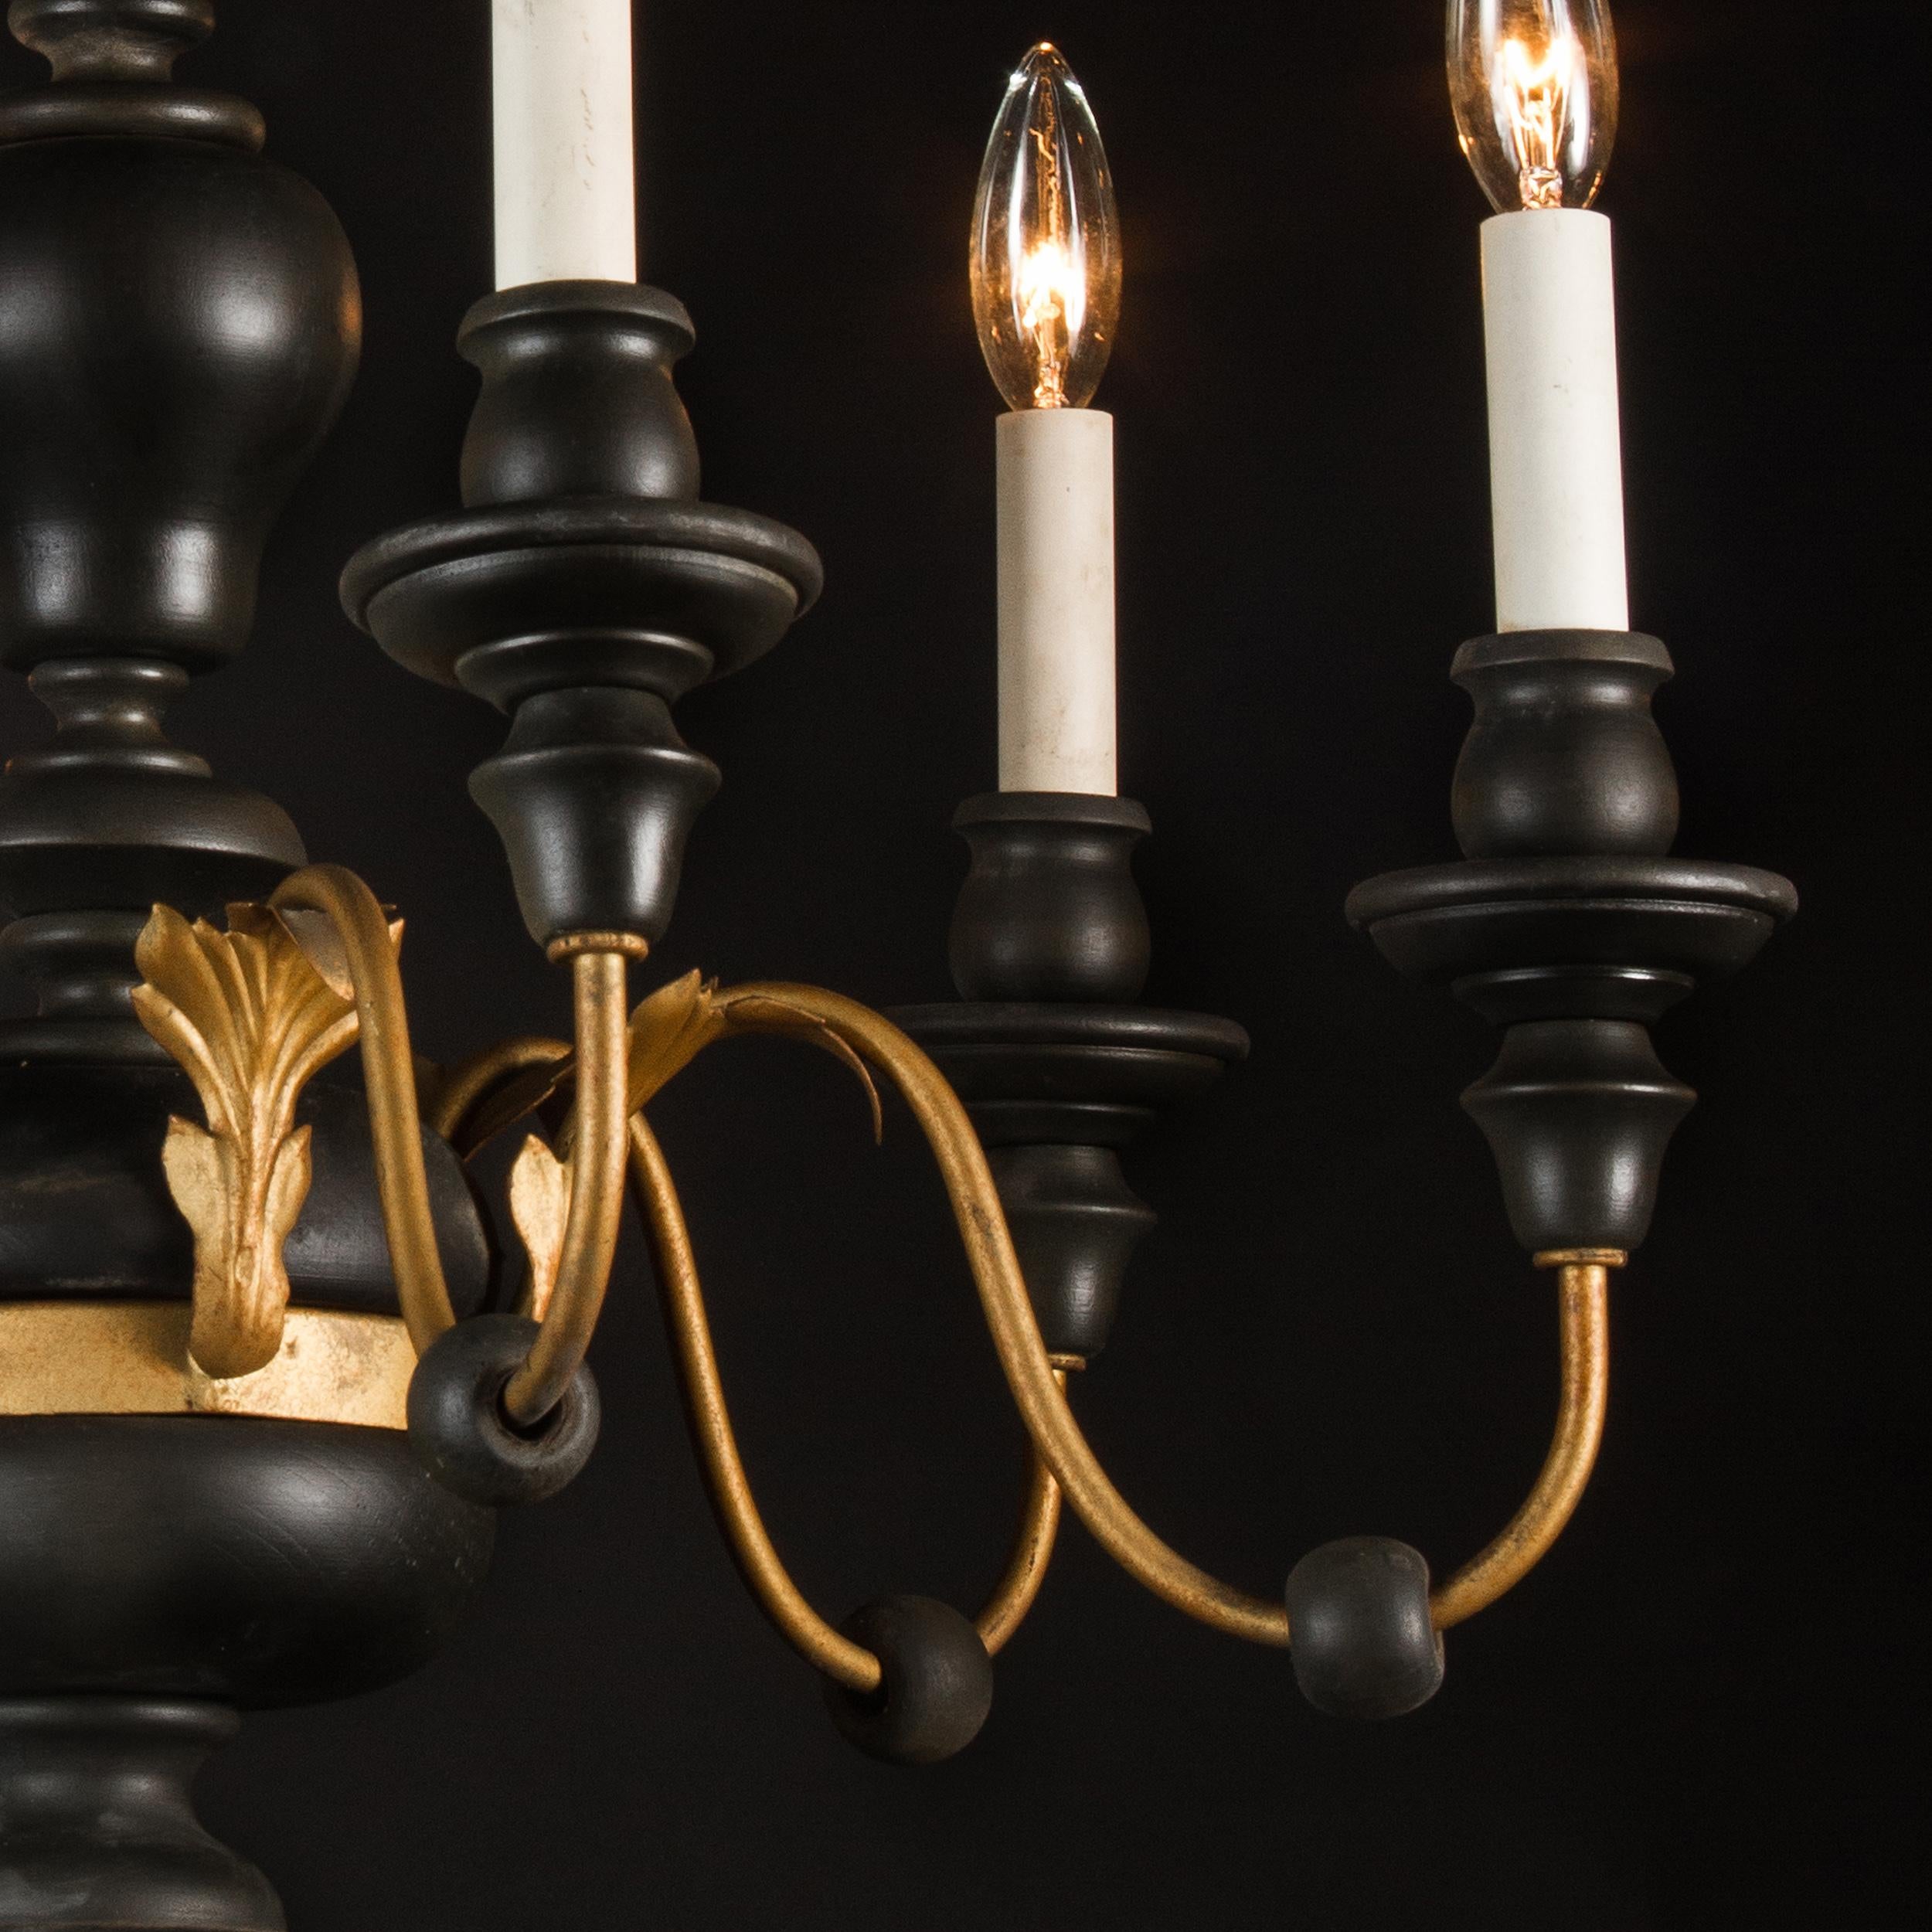 Dating to the mid-20th century, this simple and elegant chandelier is stylistically Louis XVI. Made primarily of wood, the fixture also has decorative iron and tile elements found at top and on the bases of the arms.
Each piece in our shop is